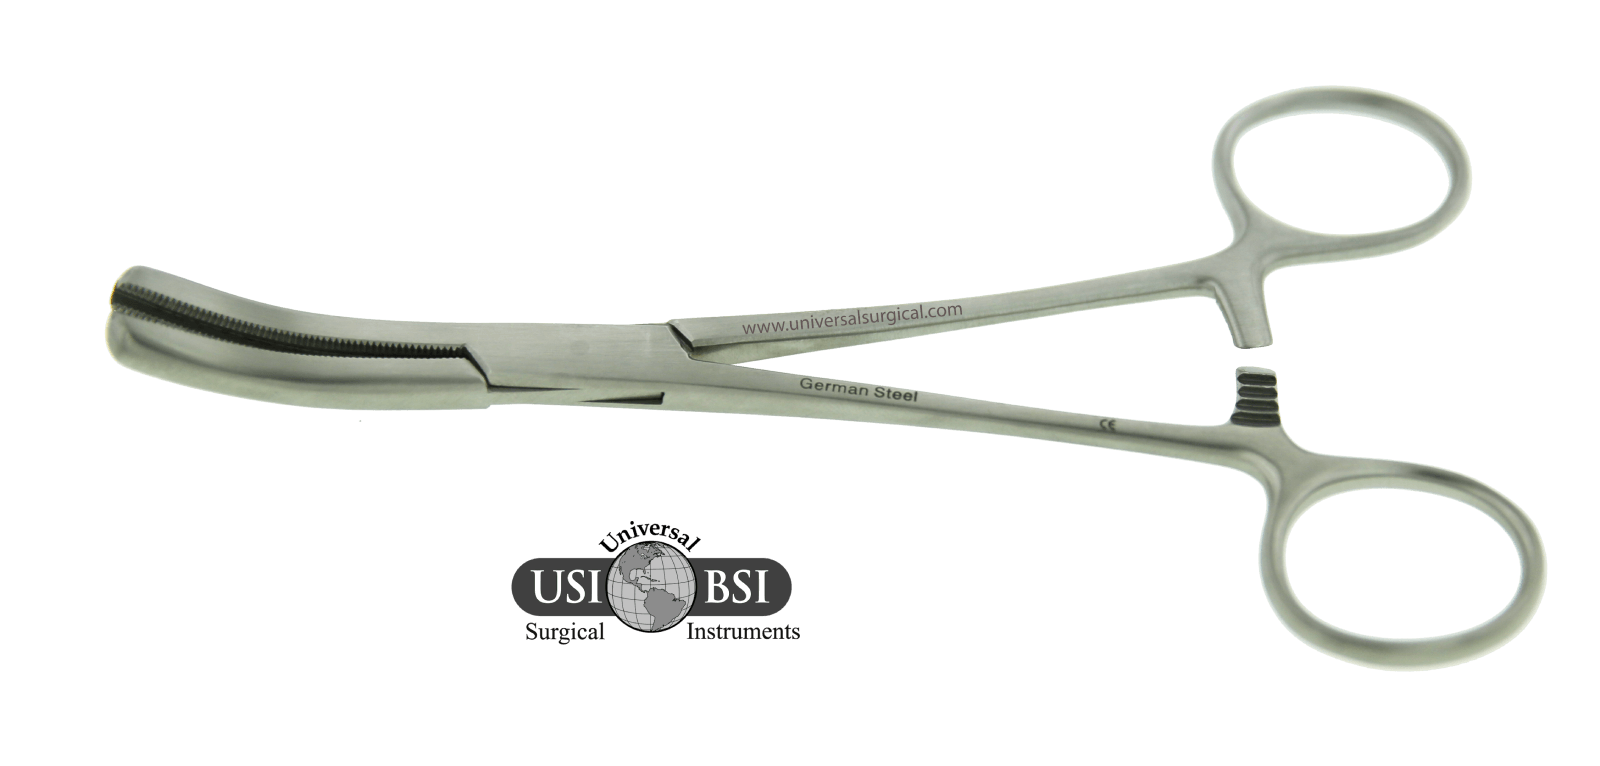 A pair of scissors is shown with the logo for usi bsi.